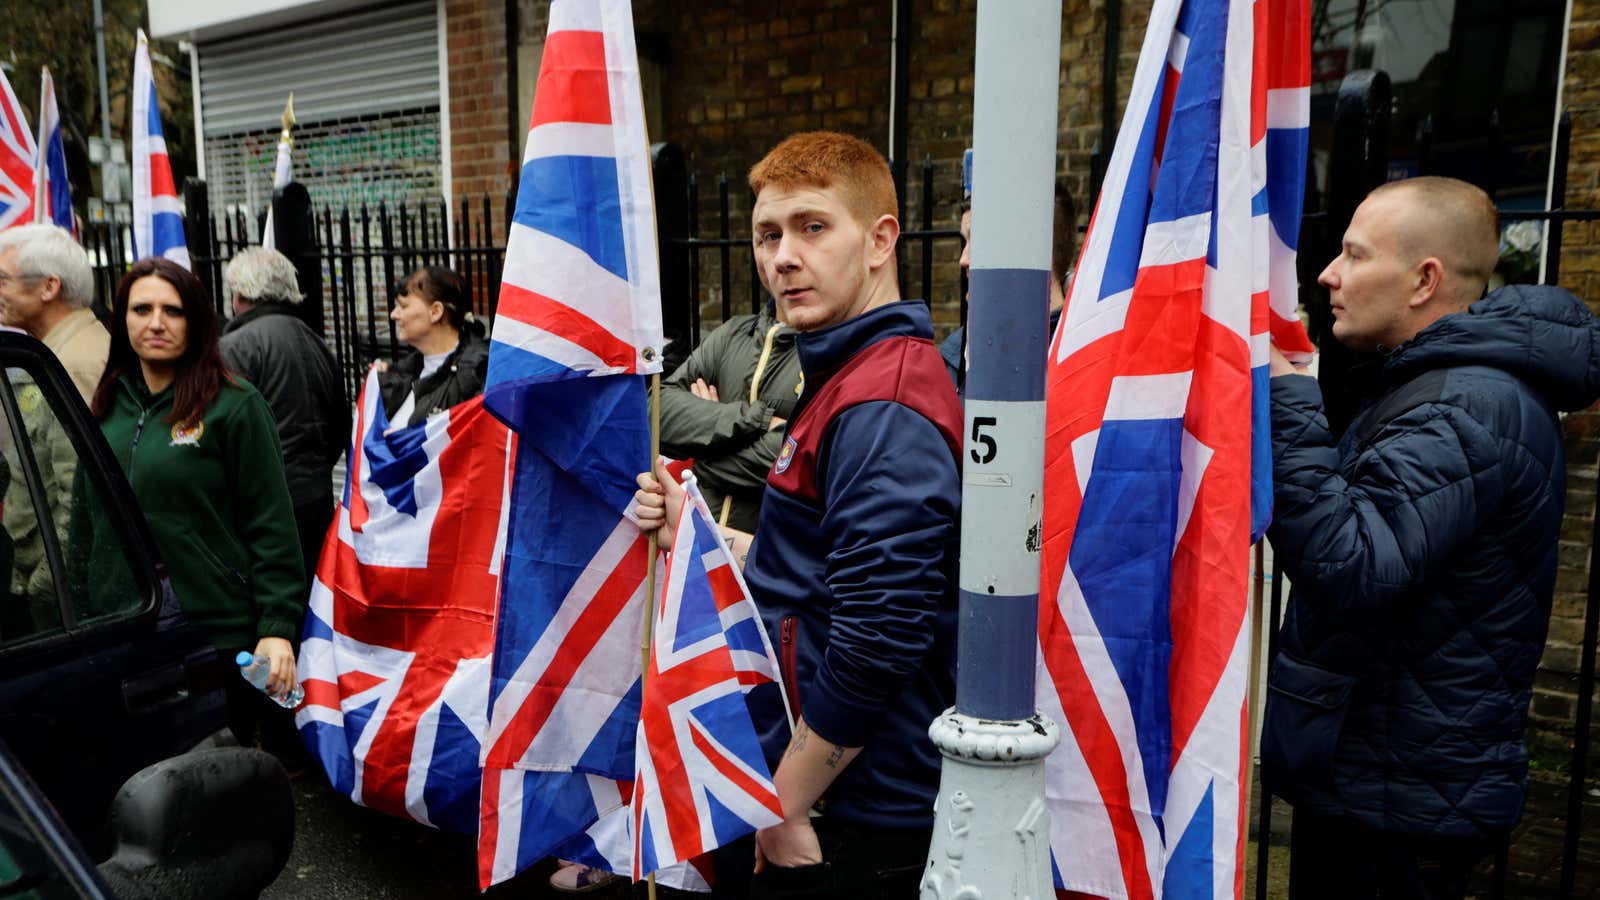 A Britain First rally with Jayda Fransen on the left.